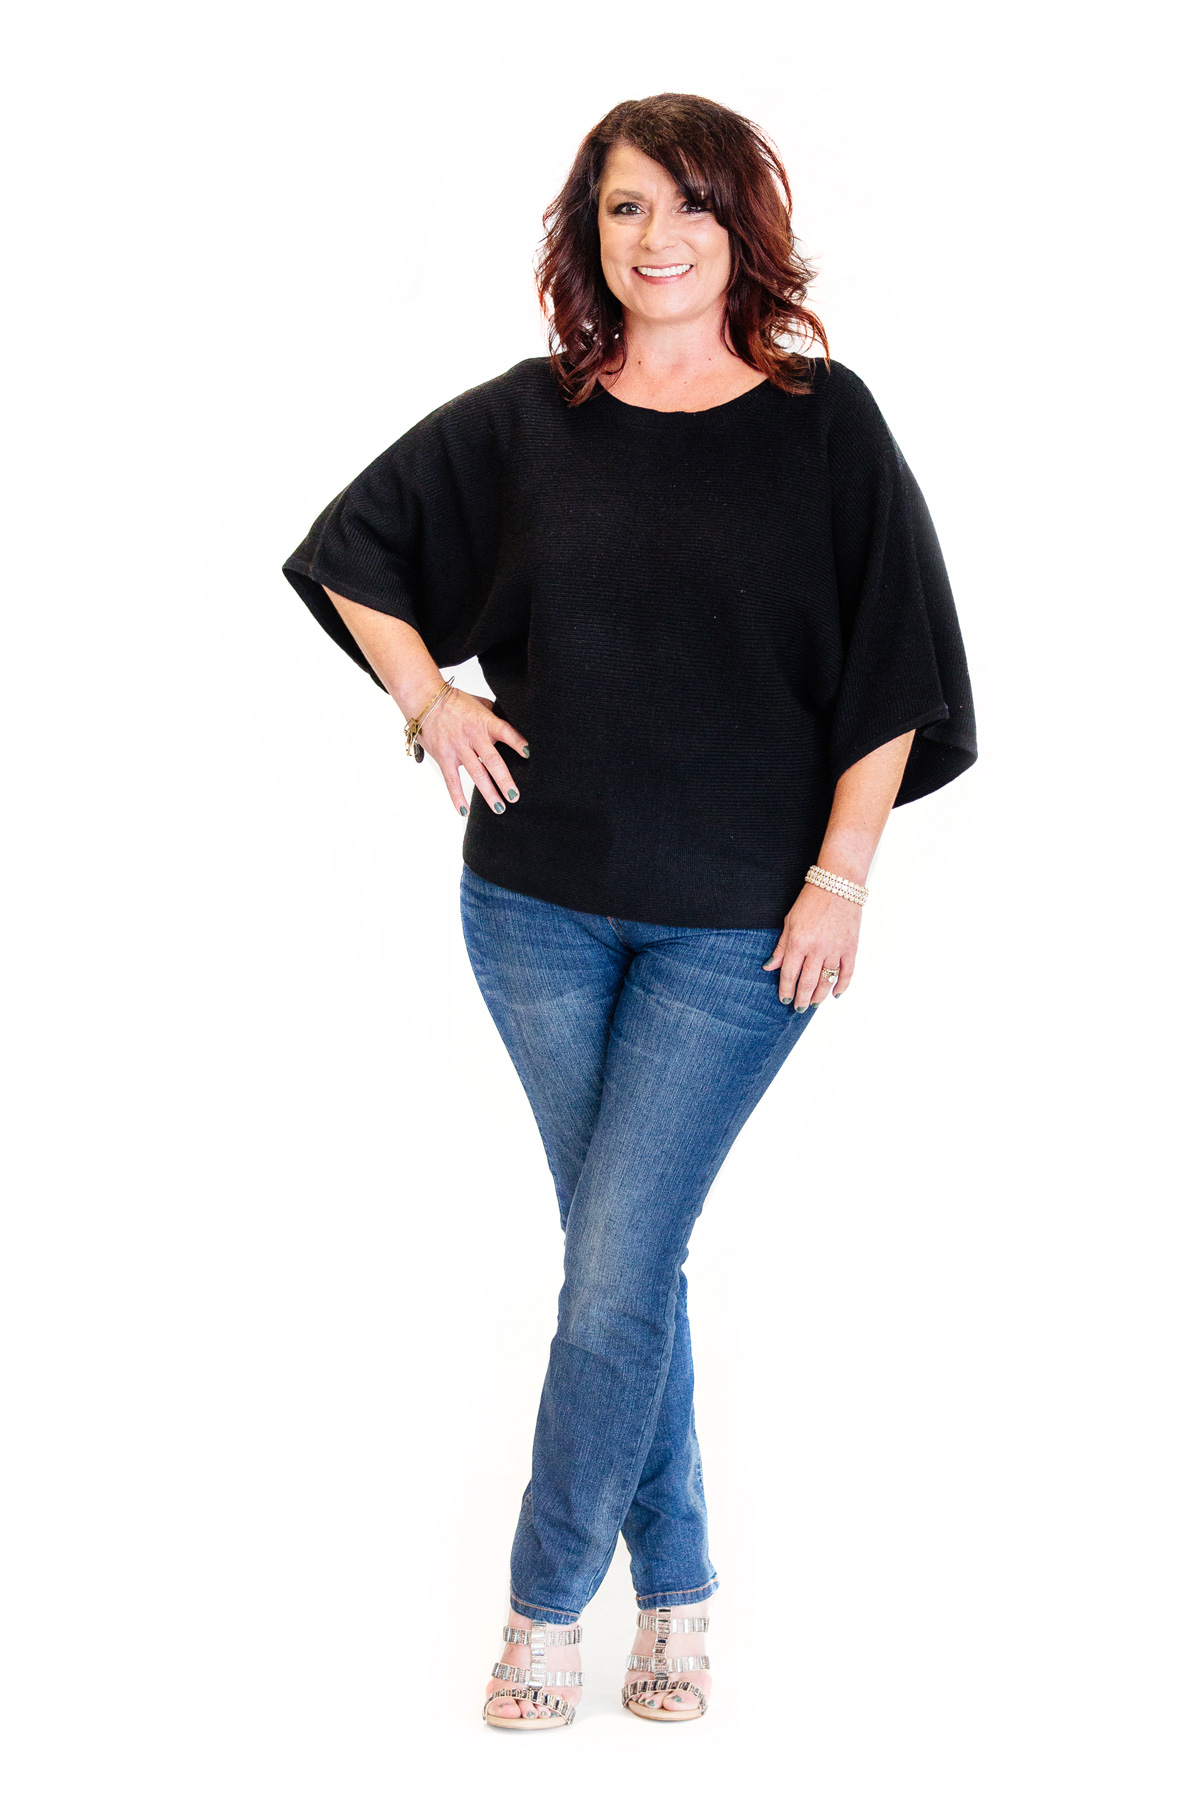 B105 radio personality Chelsie stands with hand on hip.